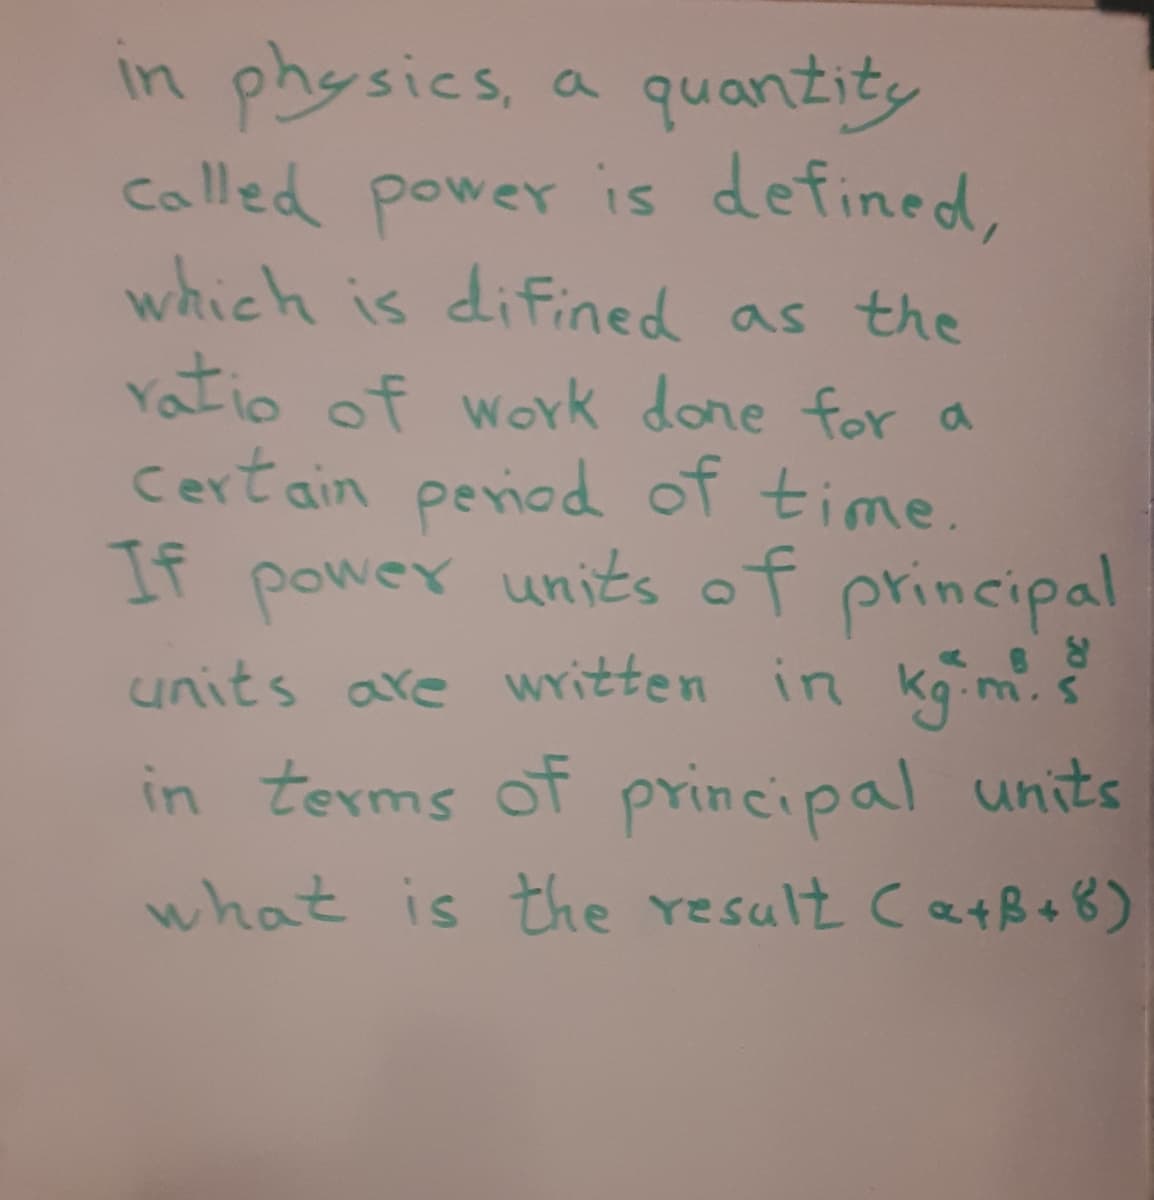 in physics, a quantity
called power is defined,
which is difined
ratio of work done for a
Certain period of time.
If power units of principal
units are written in Kgim
in terms of principal units
as the
m.s
what is the result Catß+8)
